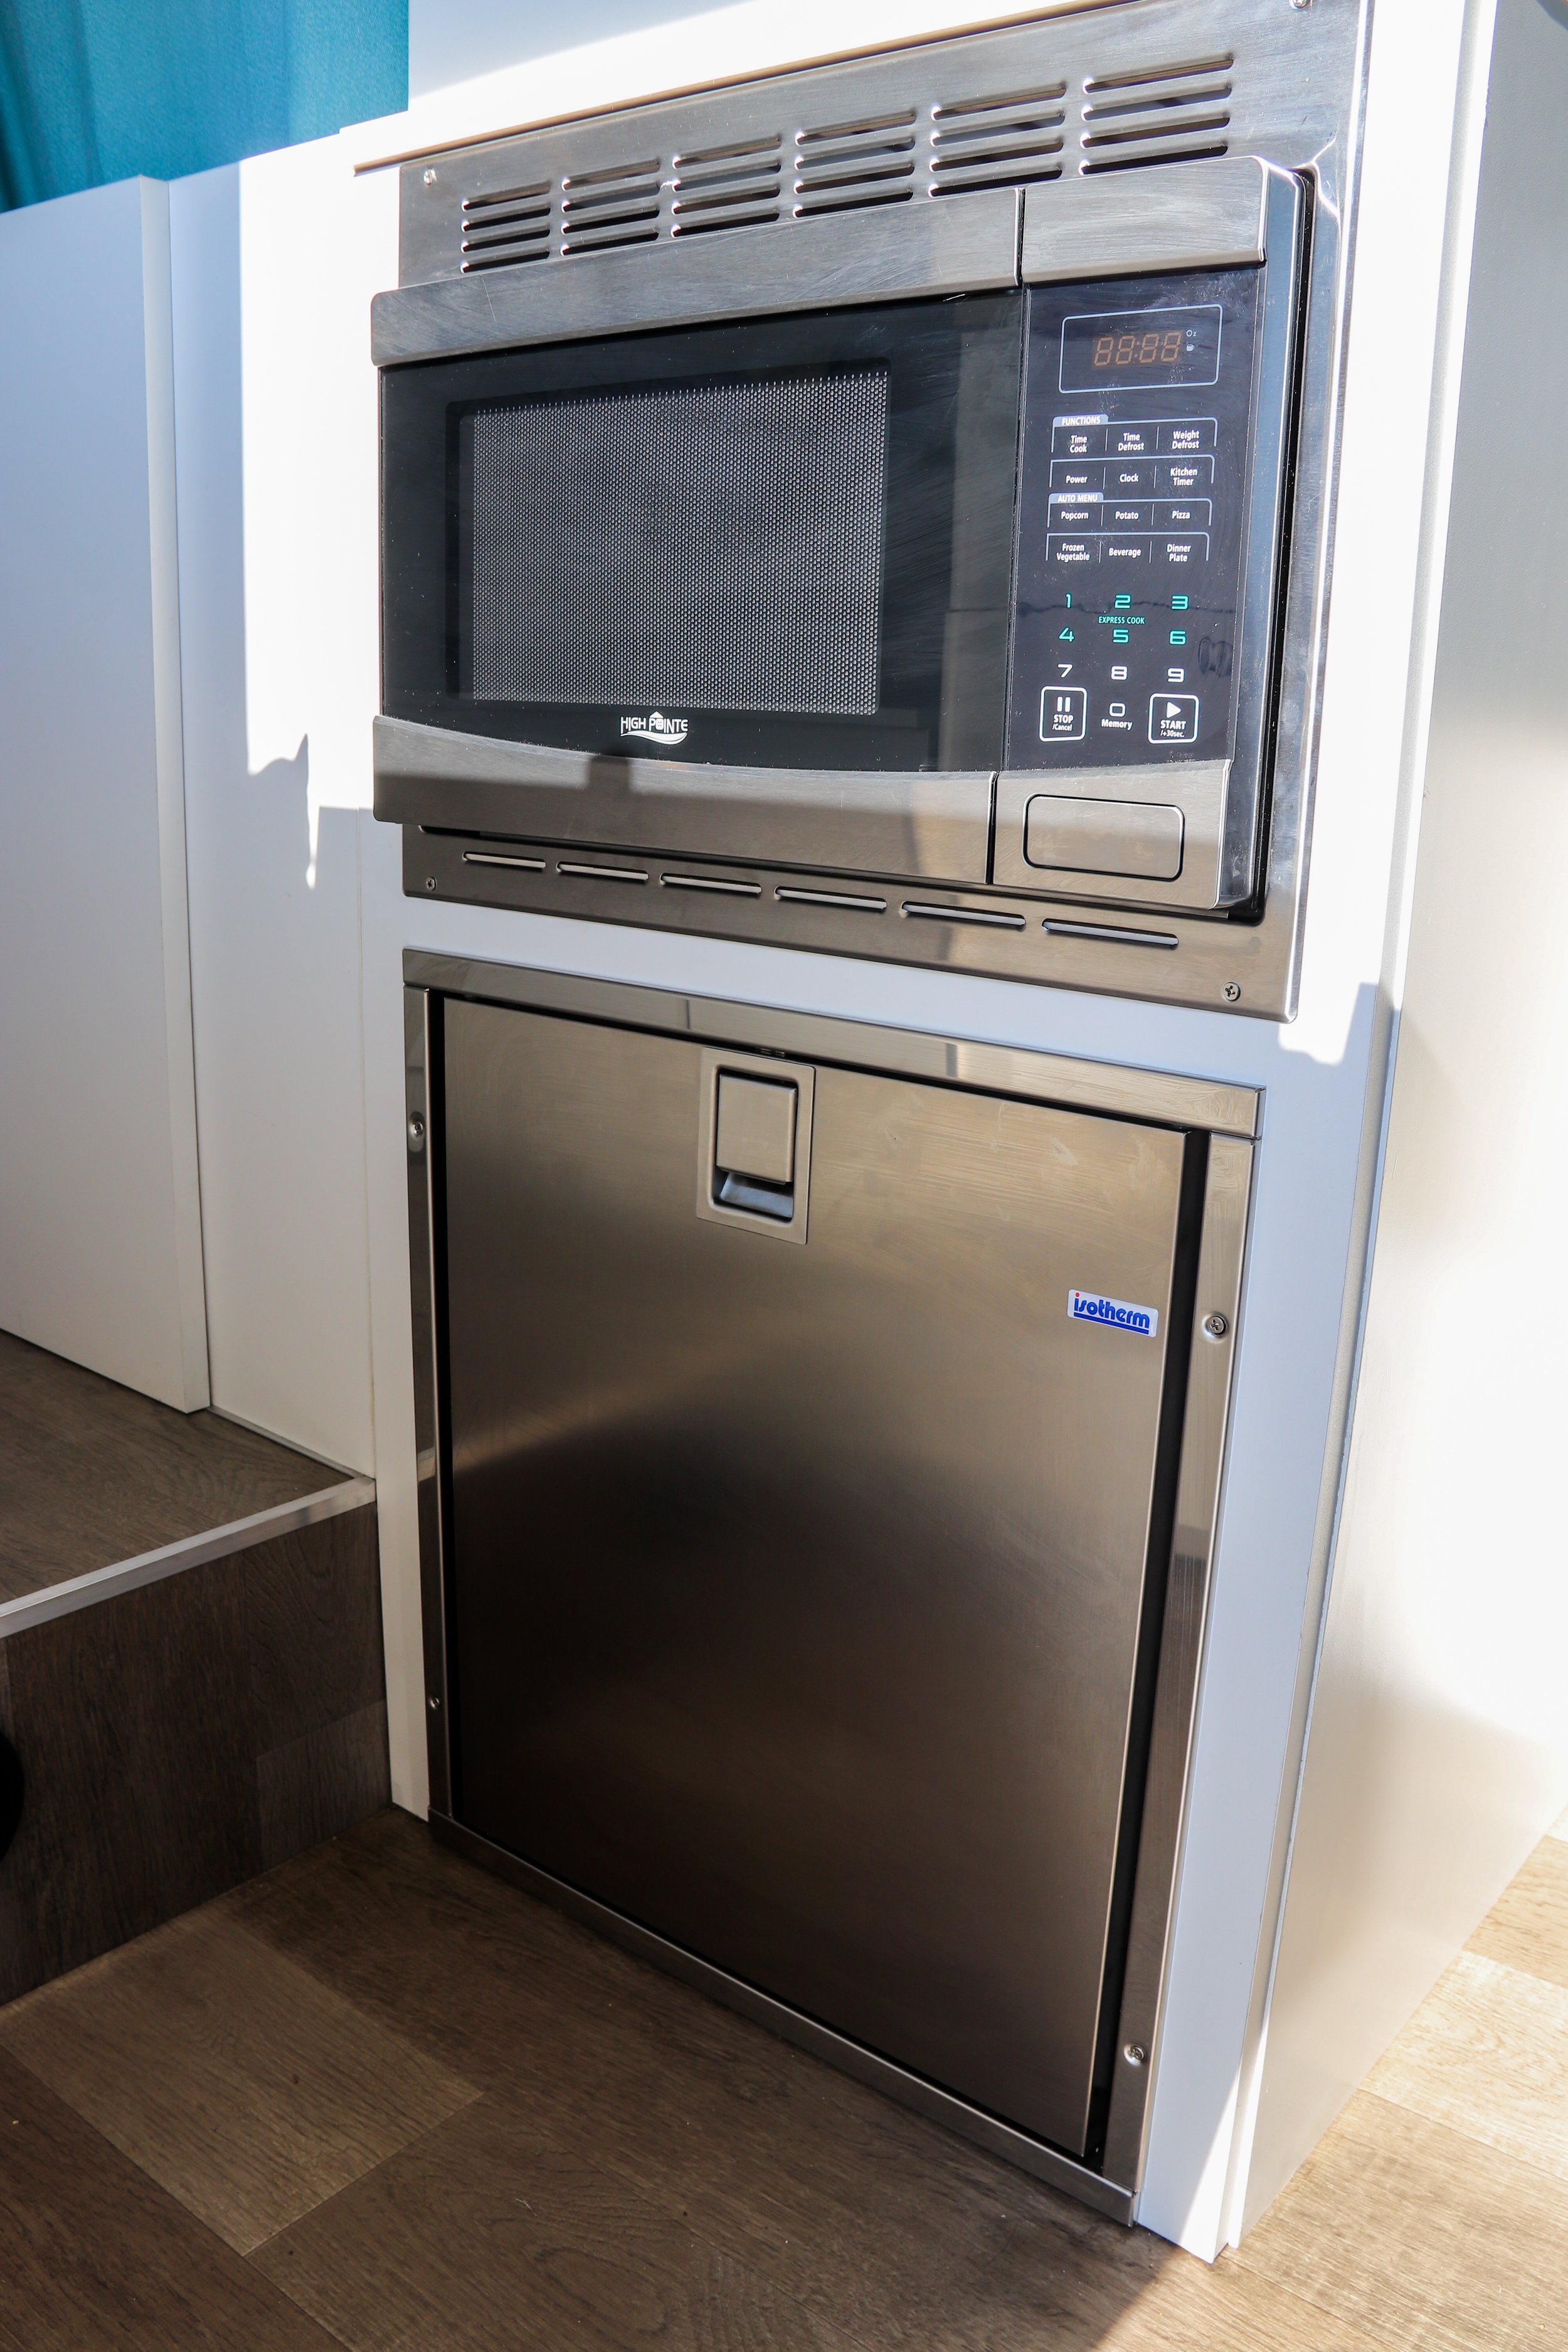 ProMaster for sale with microwave and refrigerator